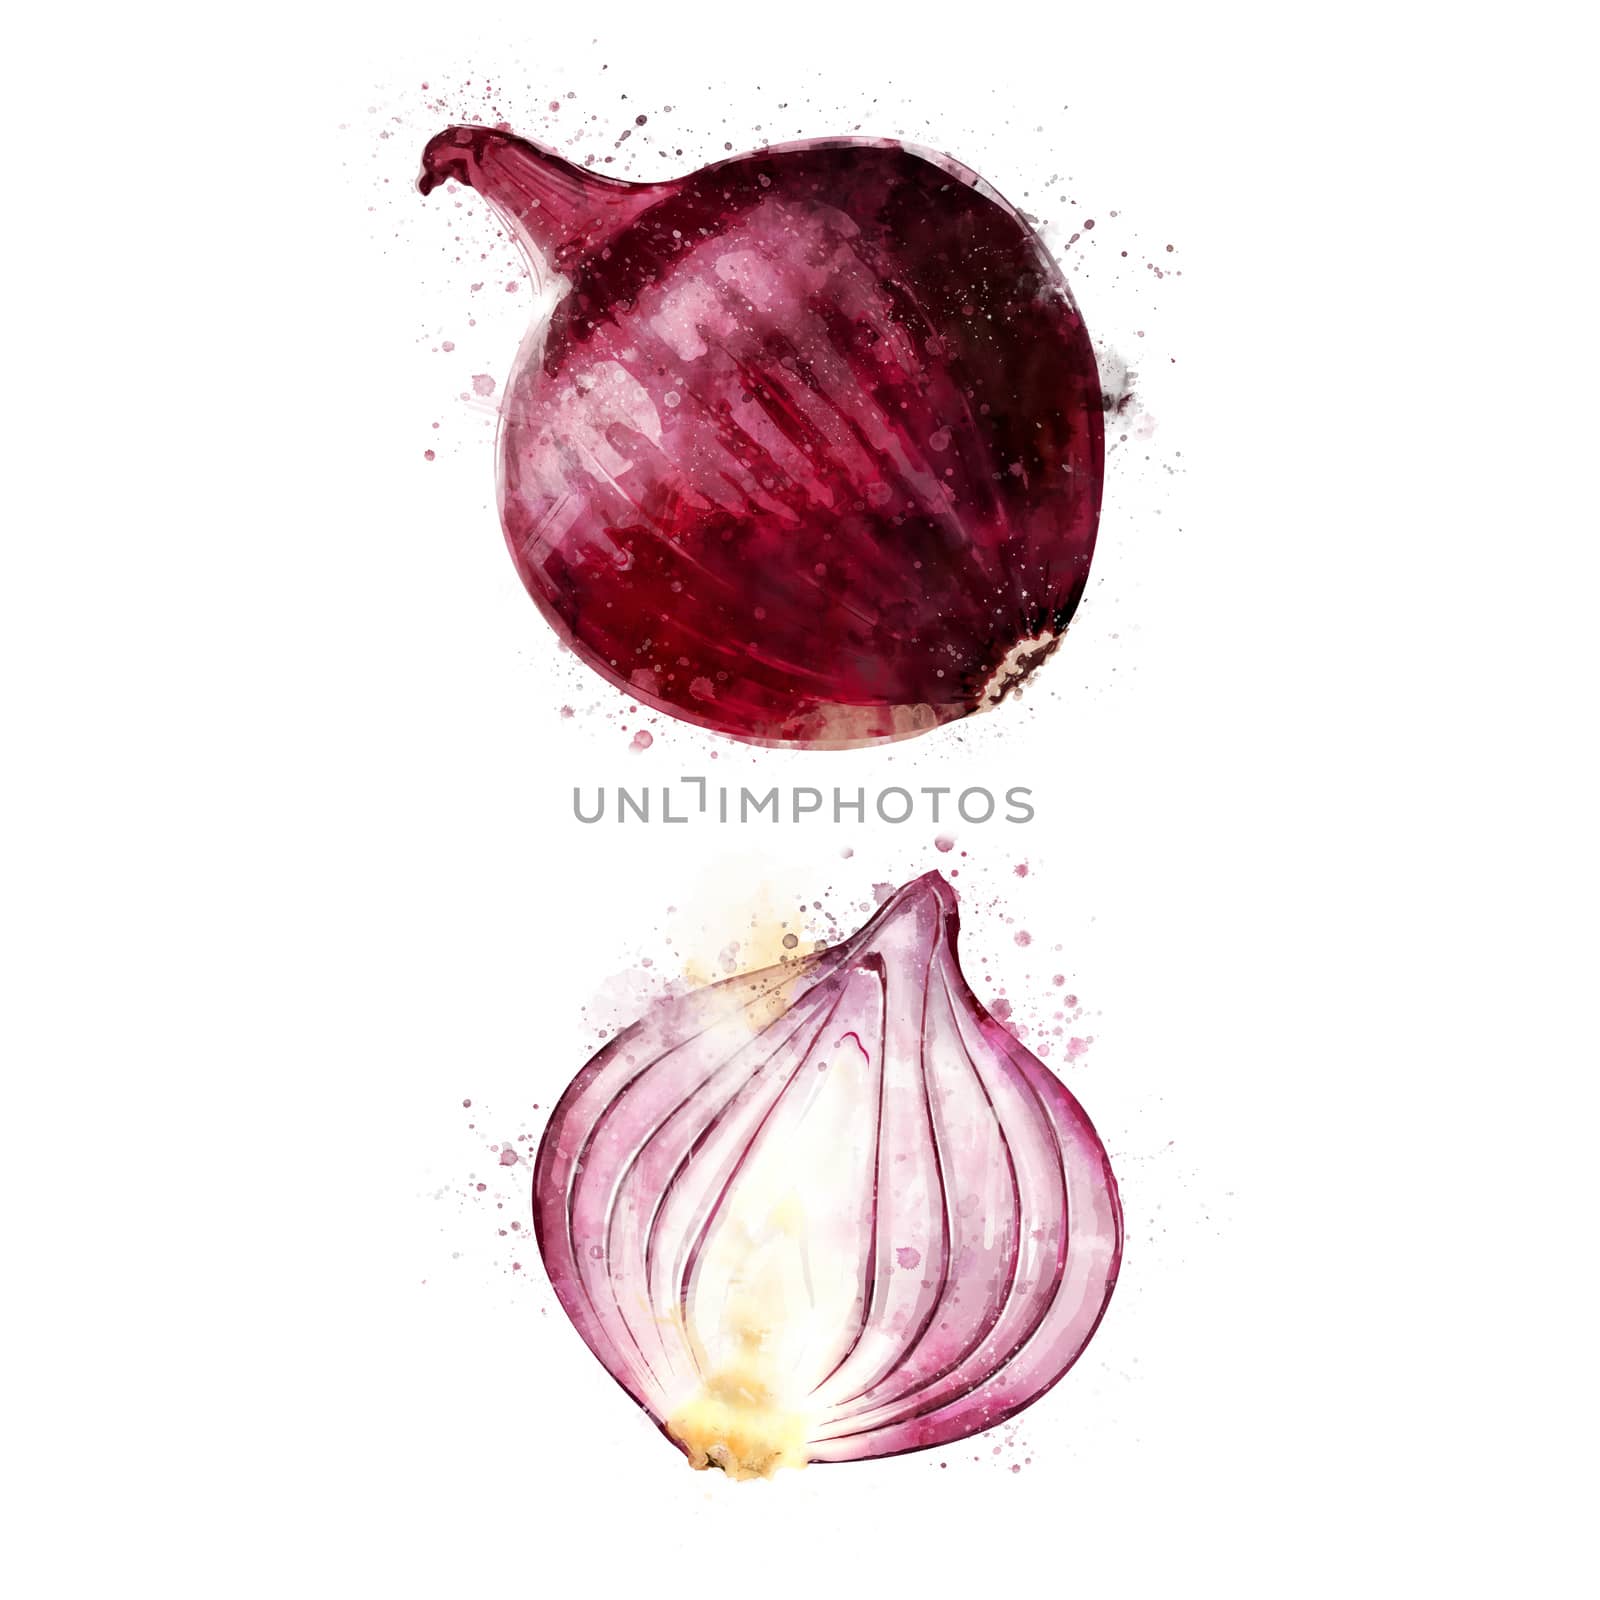 Red Onion on white background. Watercolor illustration by ConceptCafe